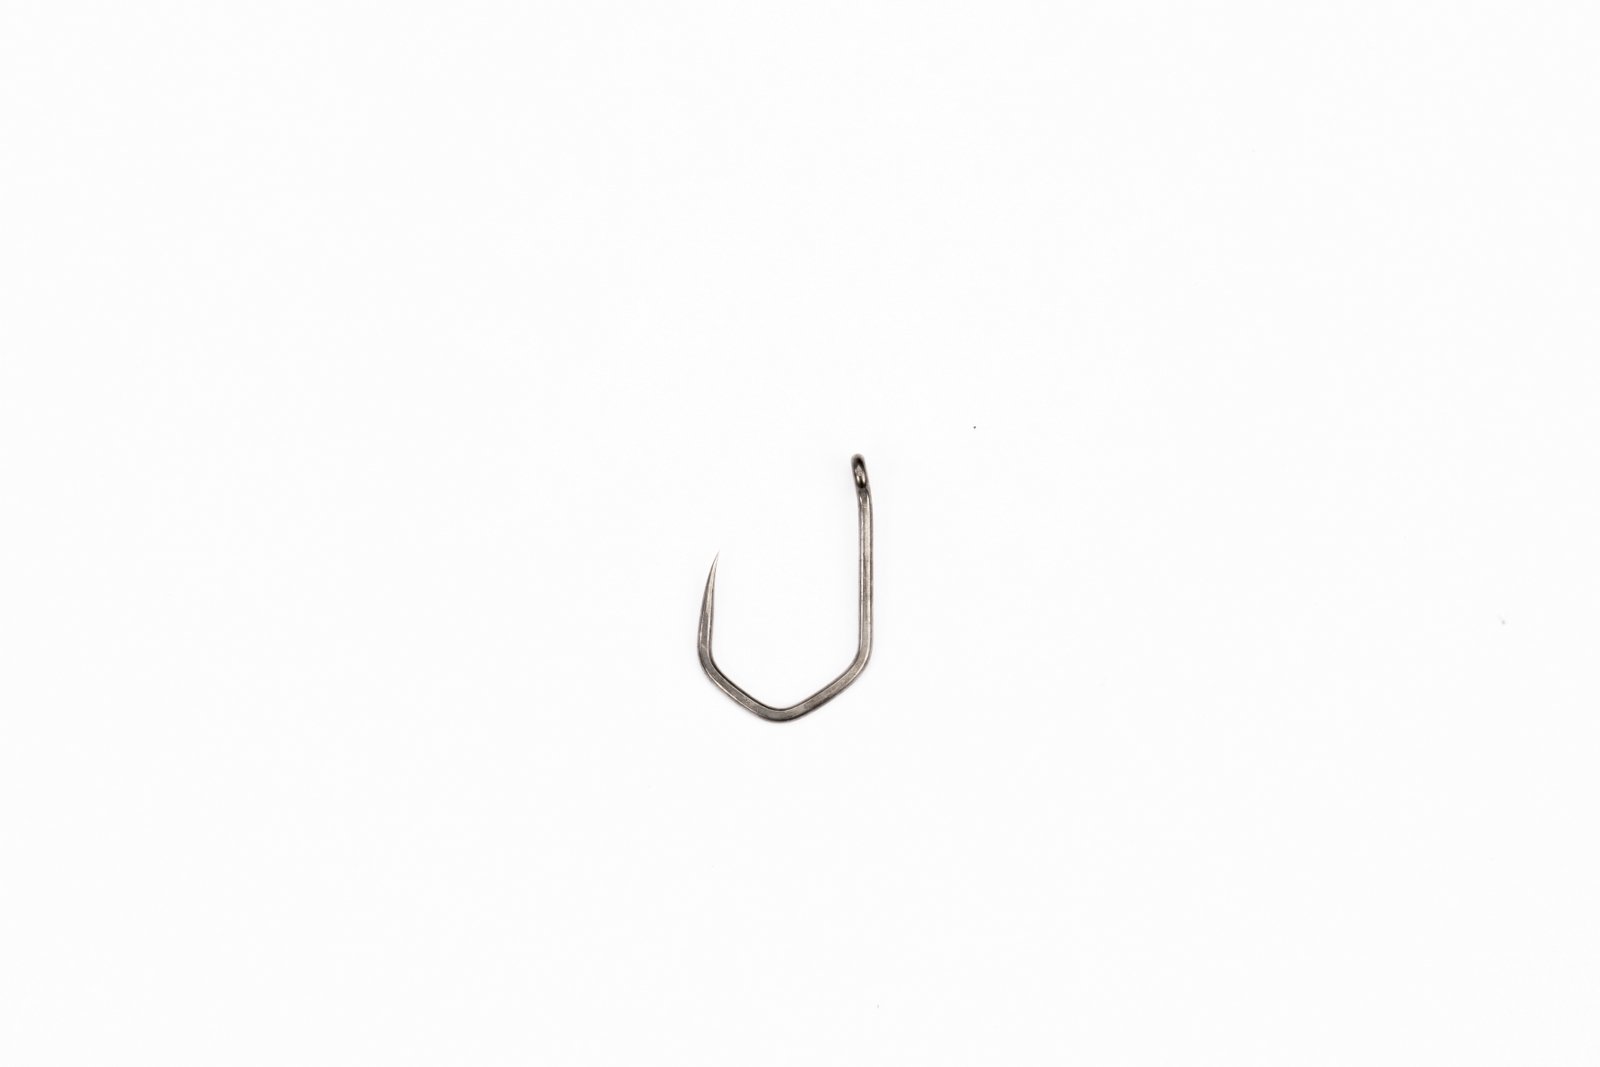 Nash Claw Size 6 Barbless Hooks & Sharpening Tackle T6176 International Shop Europe